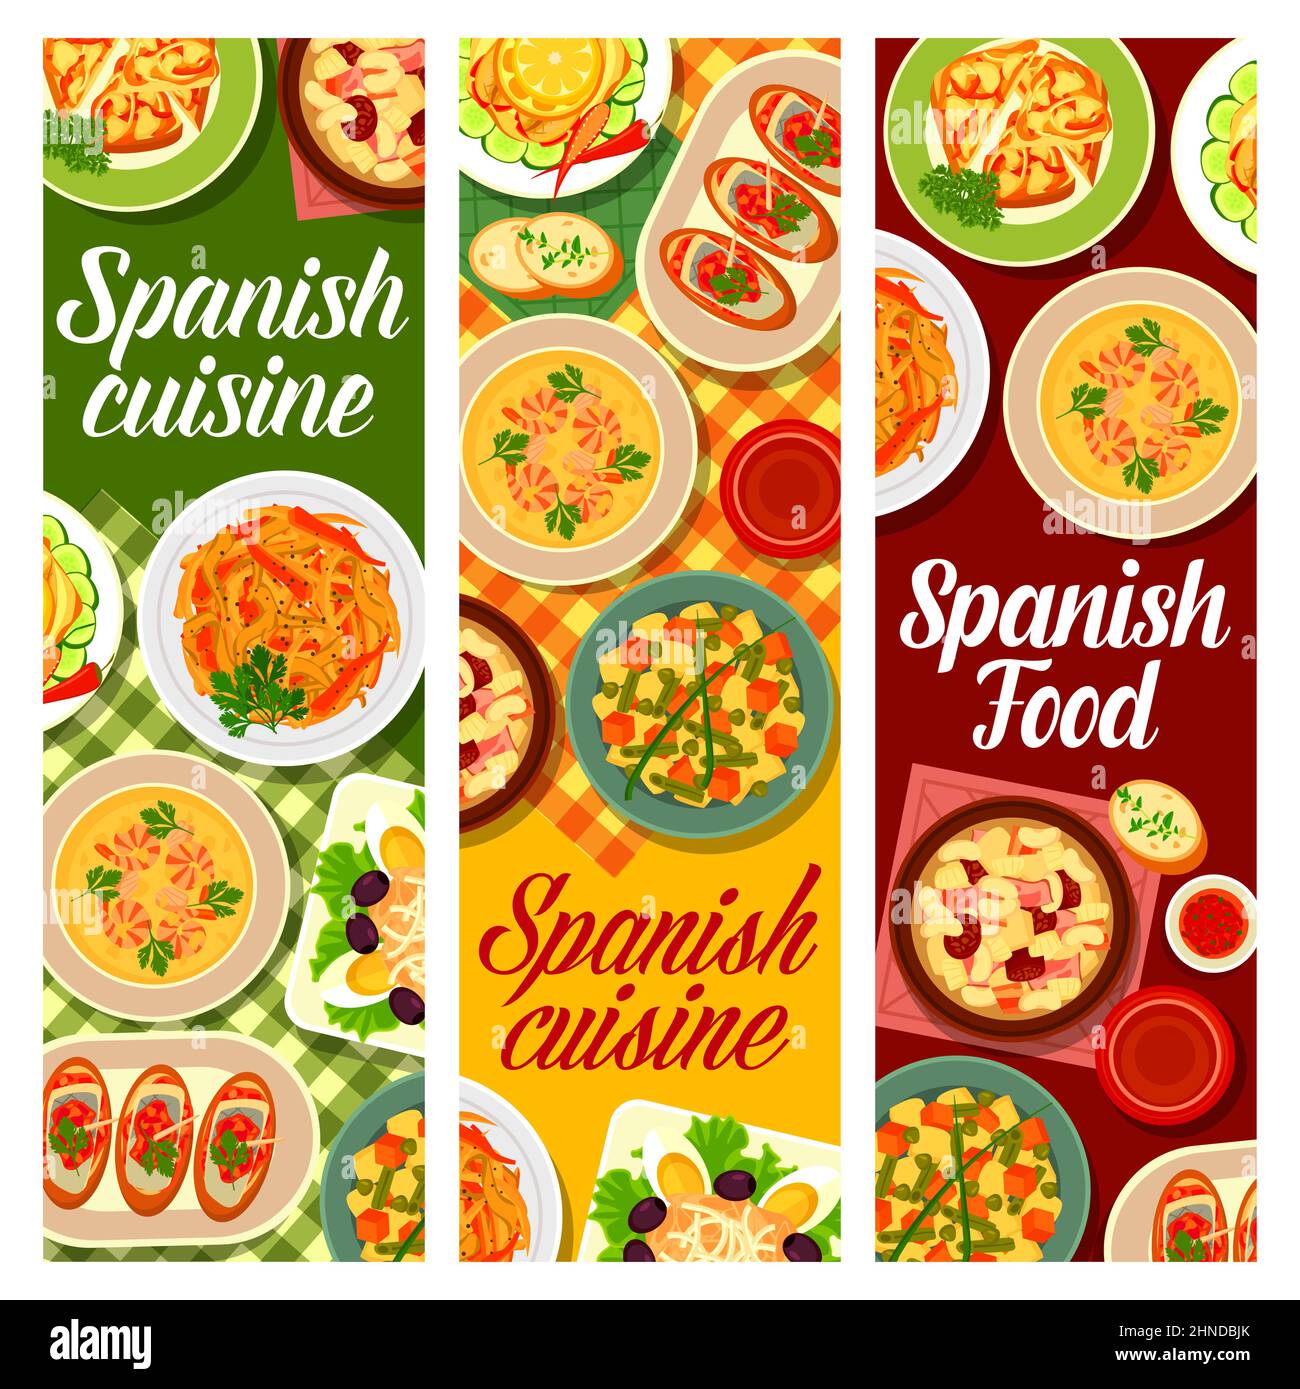 Spanish cuisine food dishes vector banners of vegetable tapas, fish salad and pork meat sausage stew. Seafood shrimp soup, sardine toast pinchos and e Stock Vector